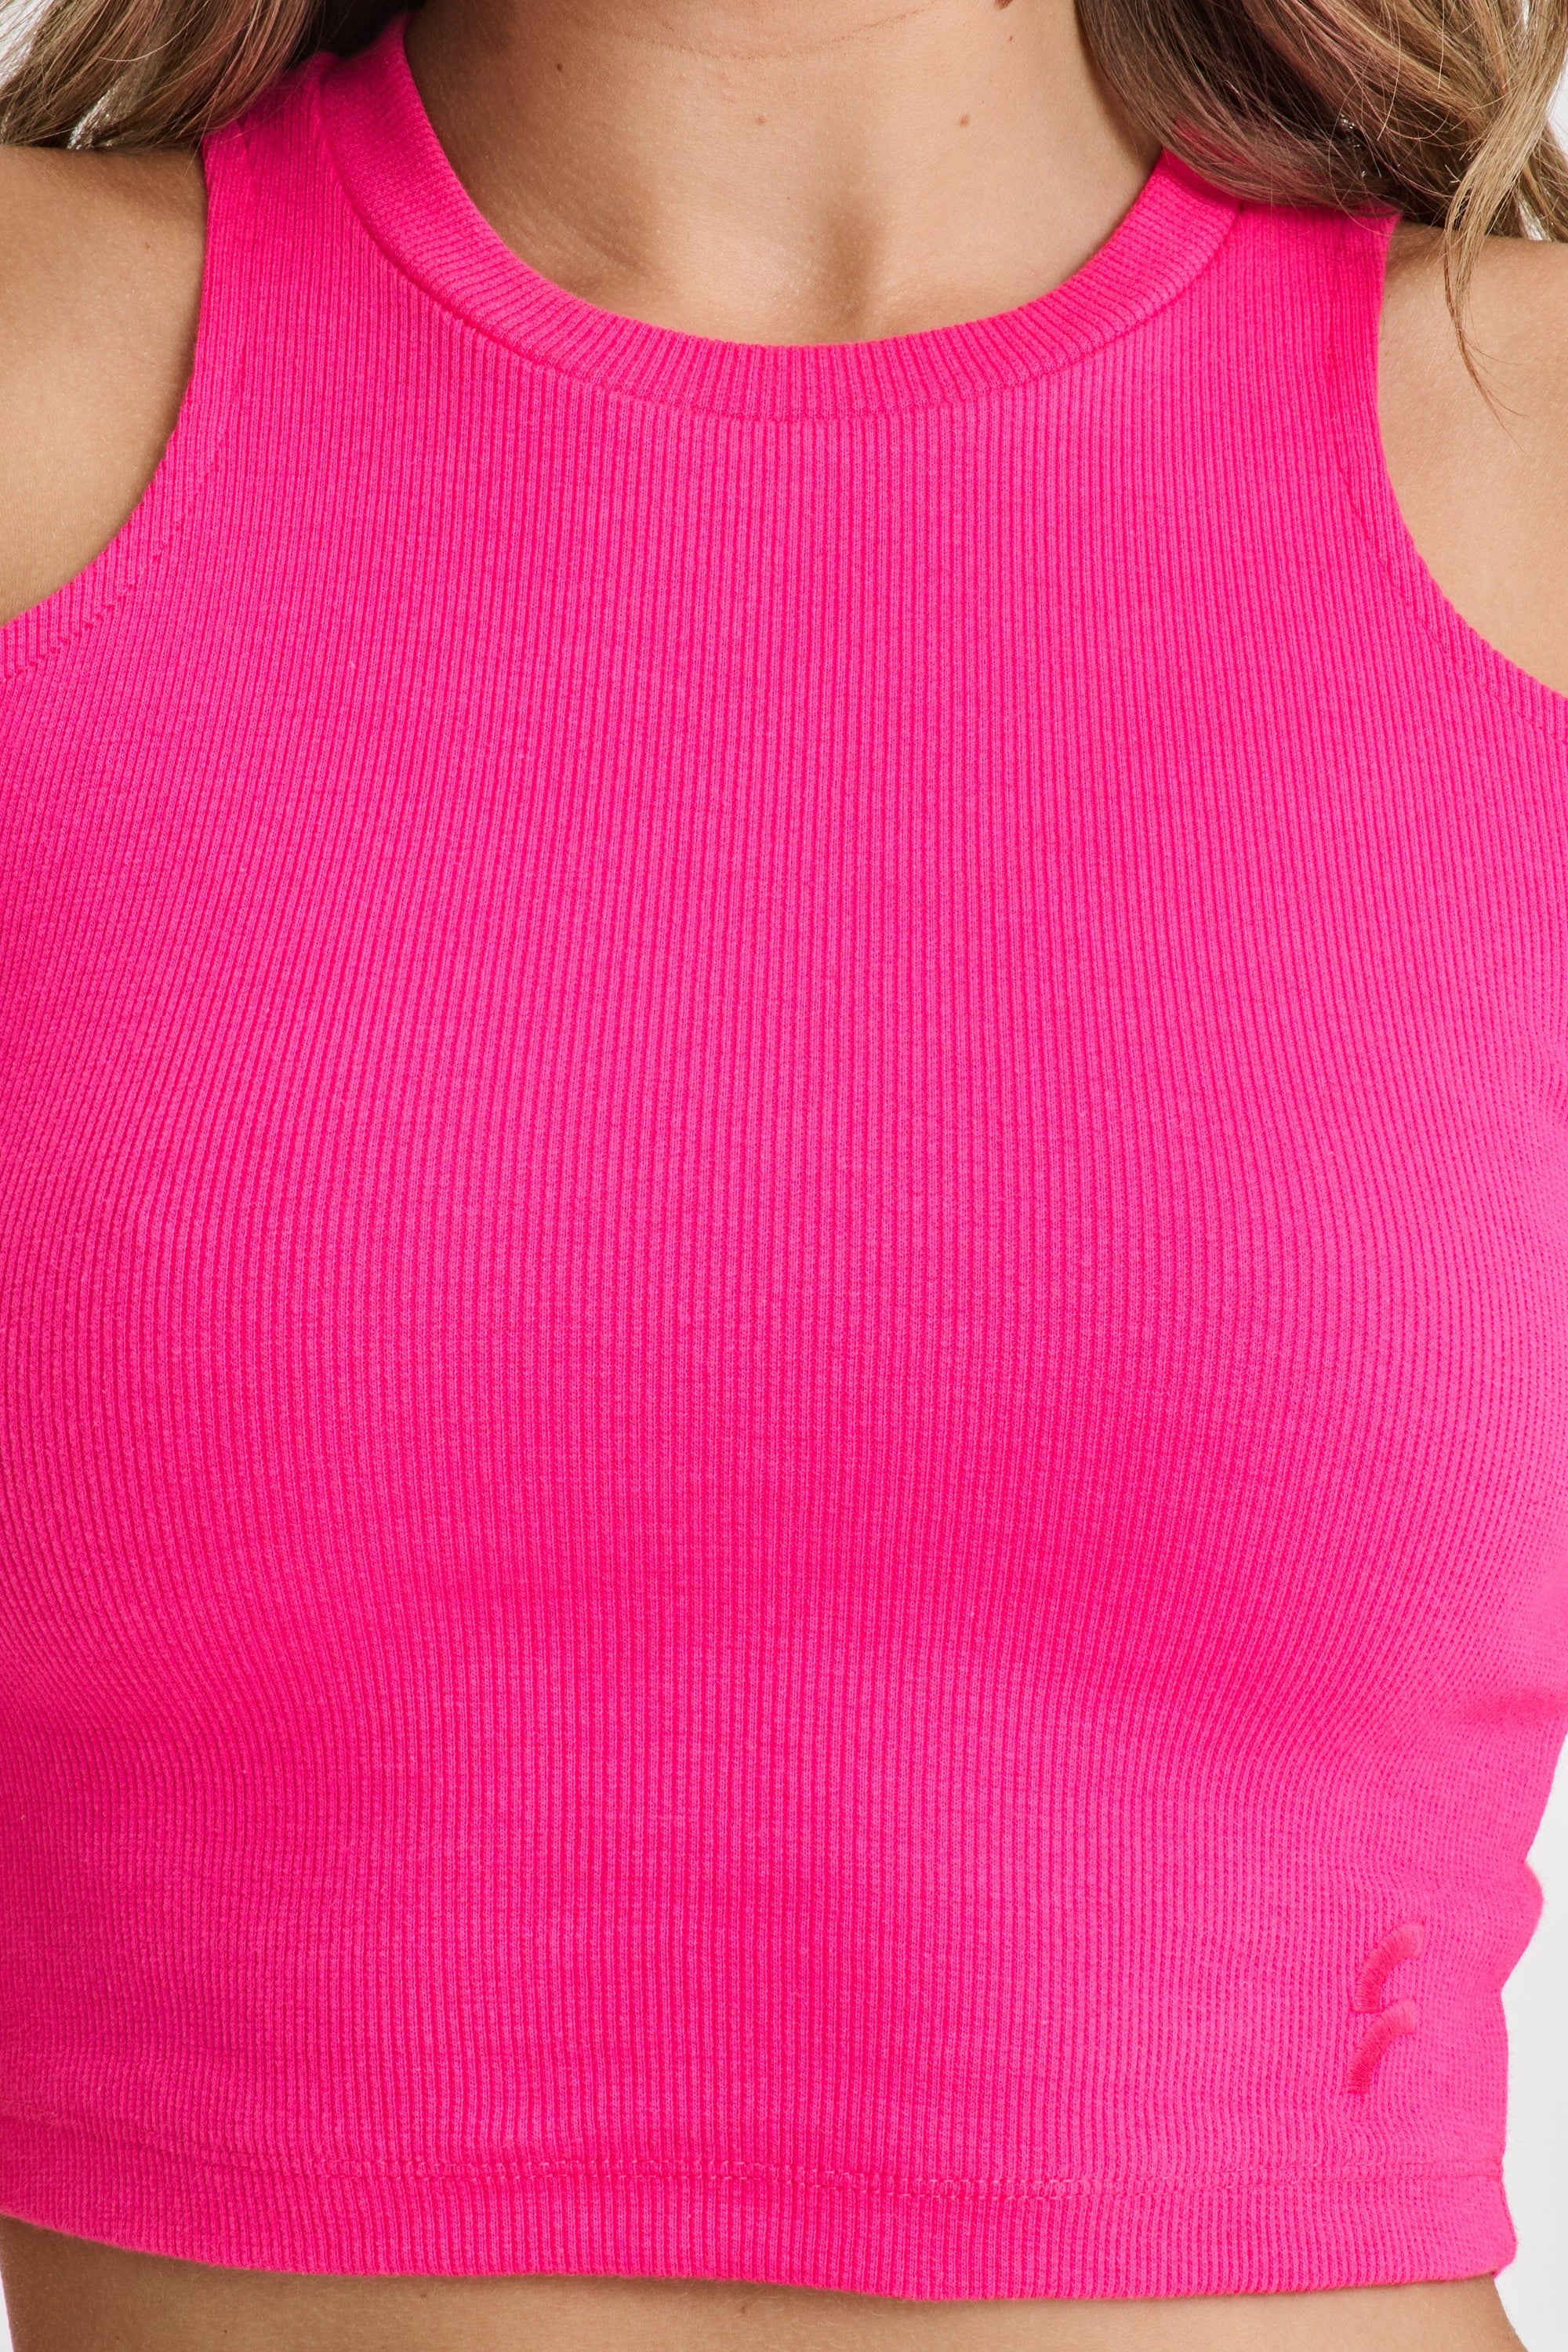 Cropped Cut Out T Shirt - Pink 2